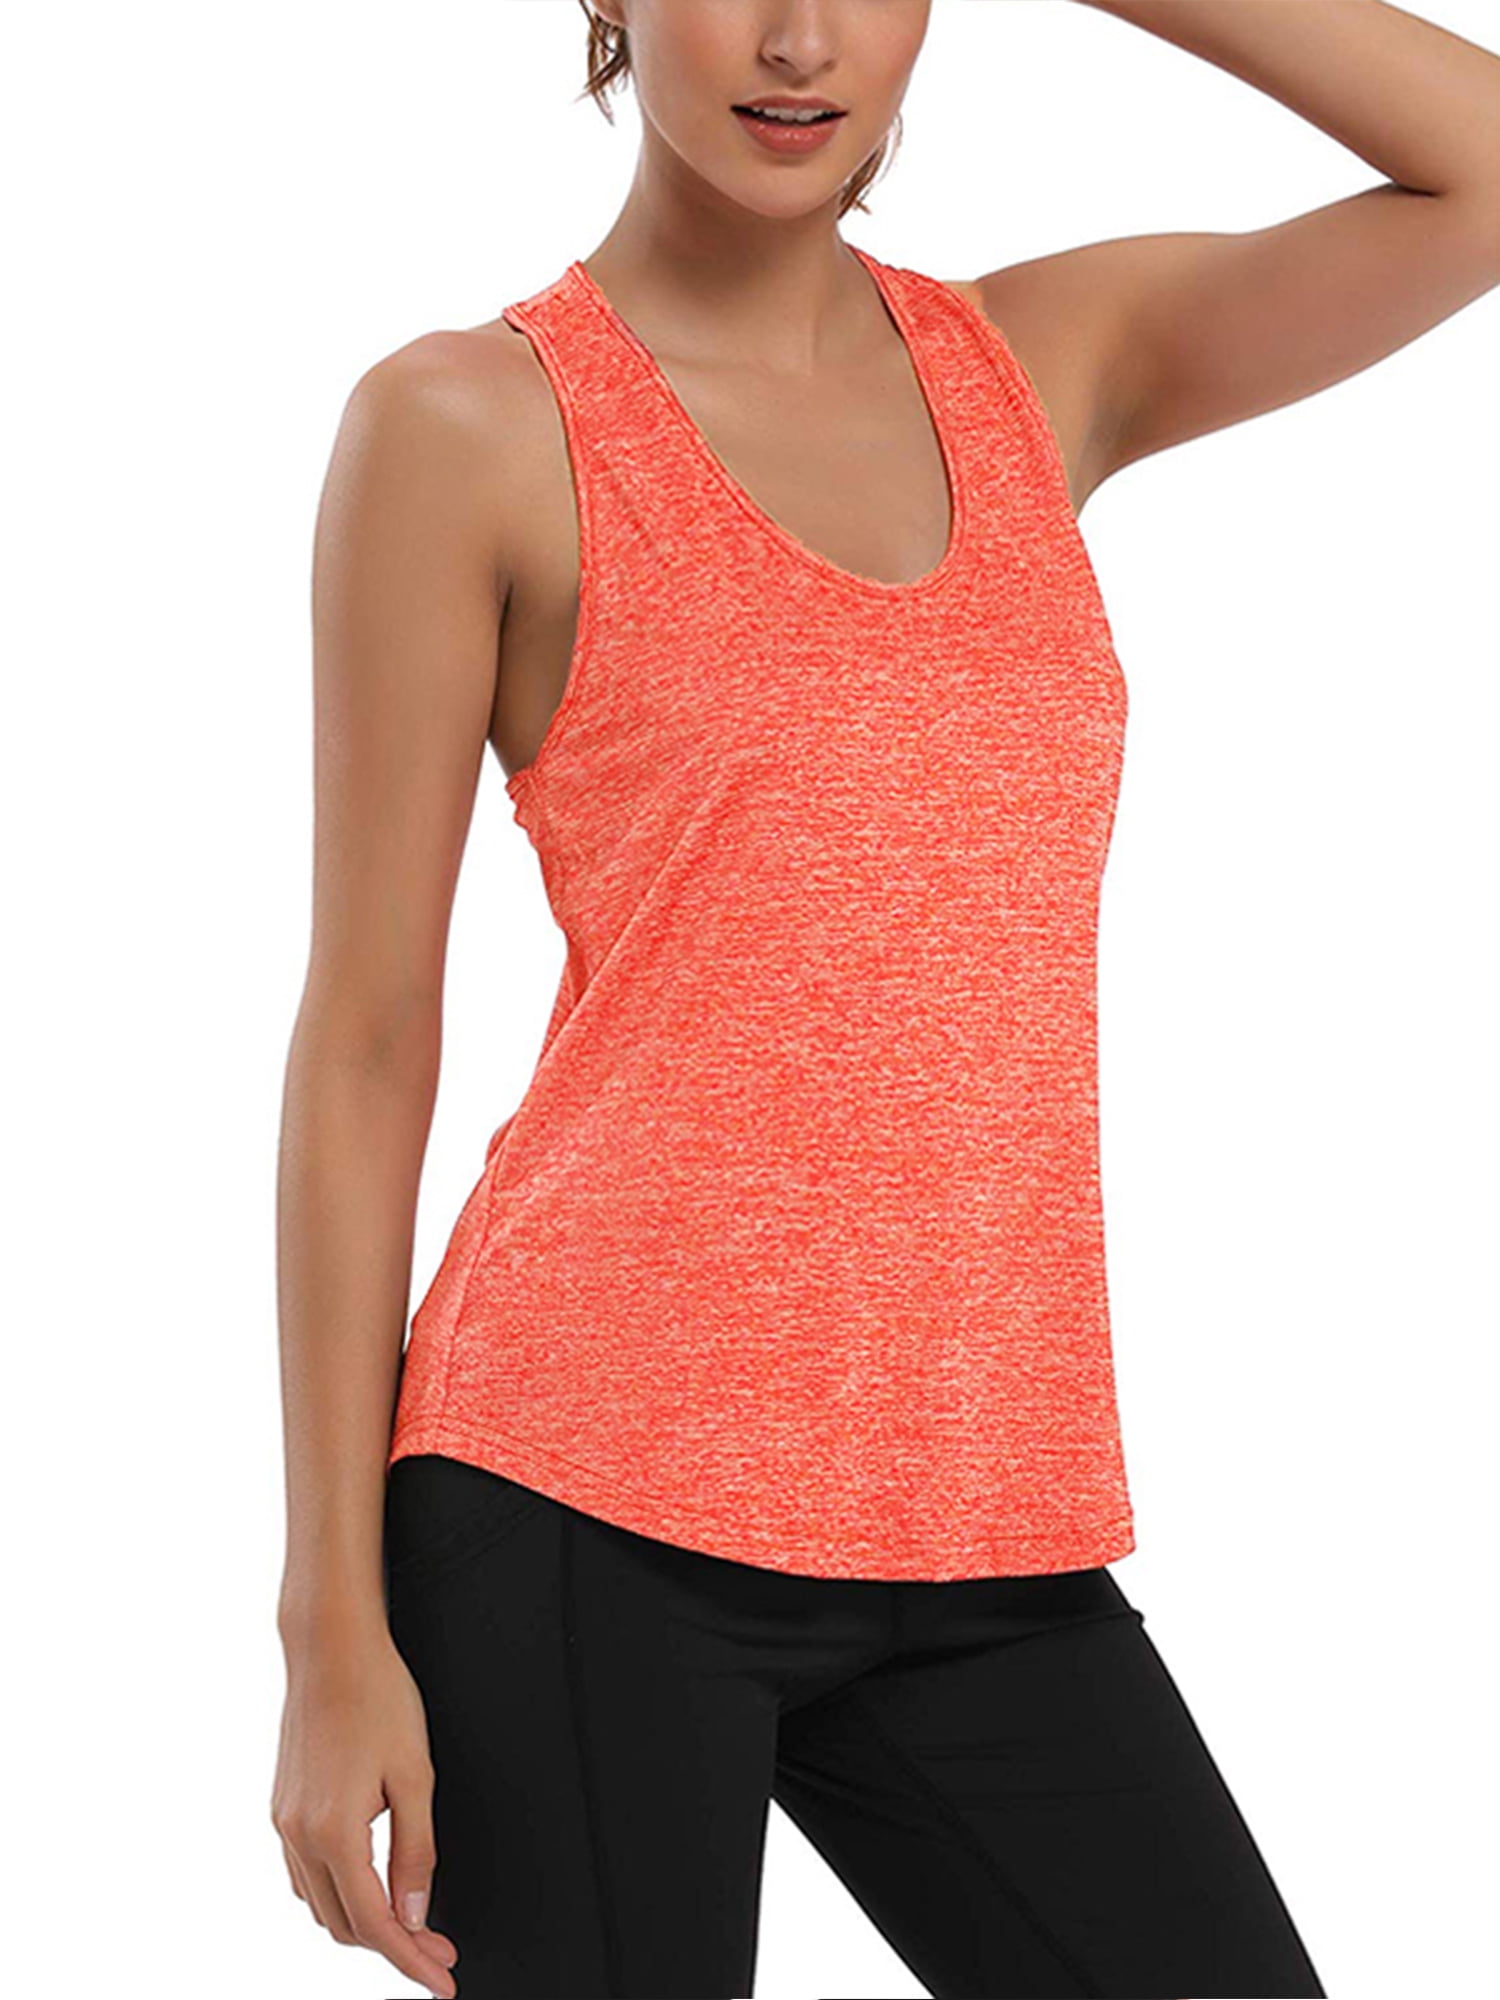 Womens Tank Tops Workout Tanks Gym Tops Mesh Yoga Tops Fitness Shirt Running Exercise Clothing Athletic Tee